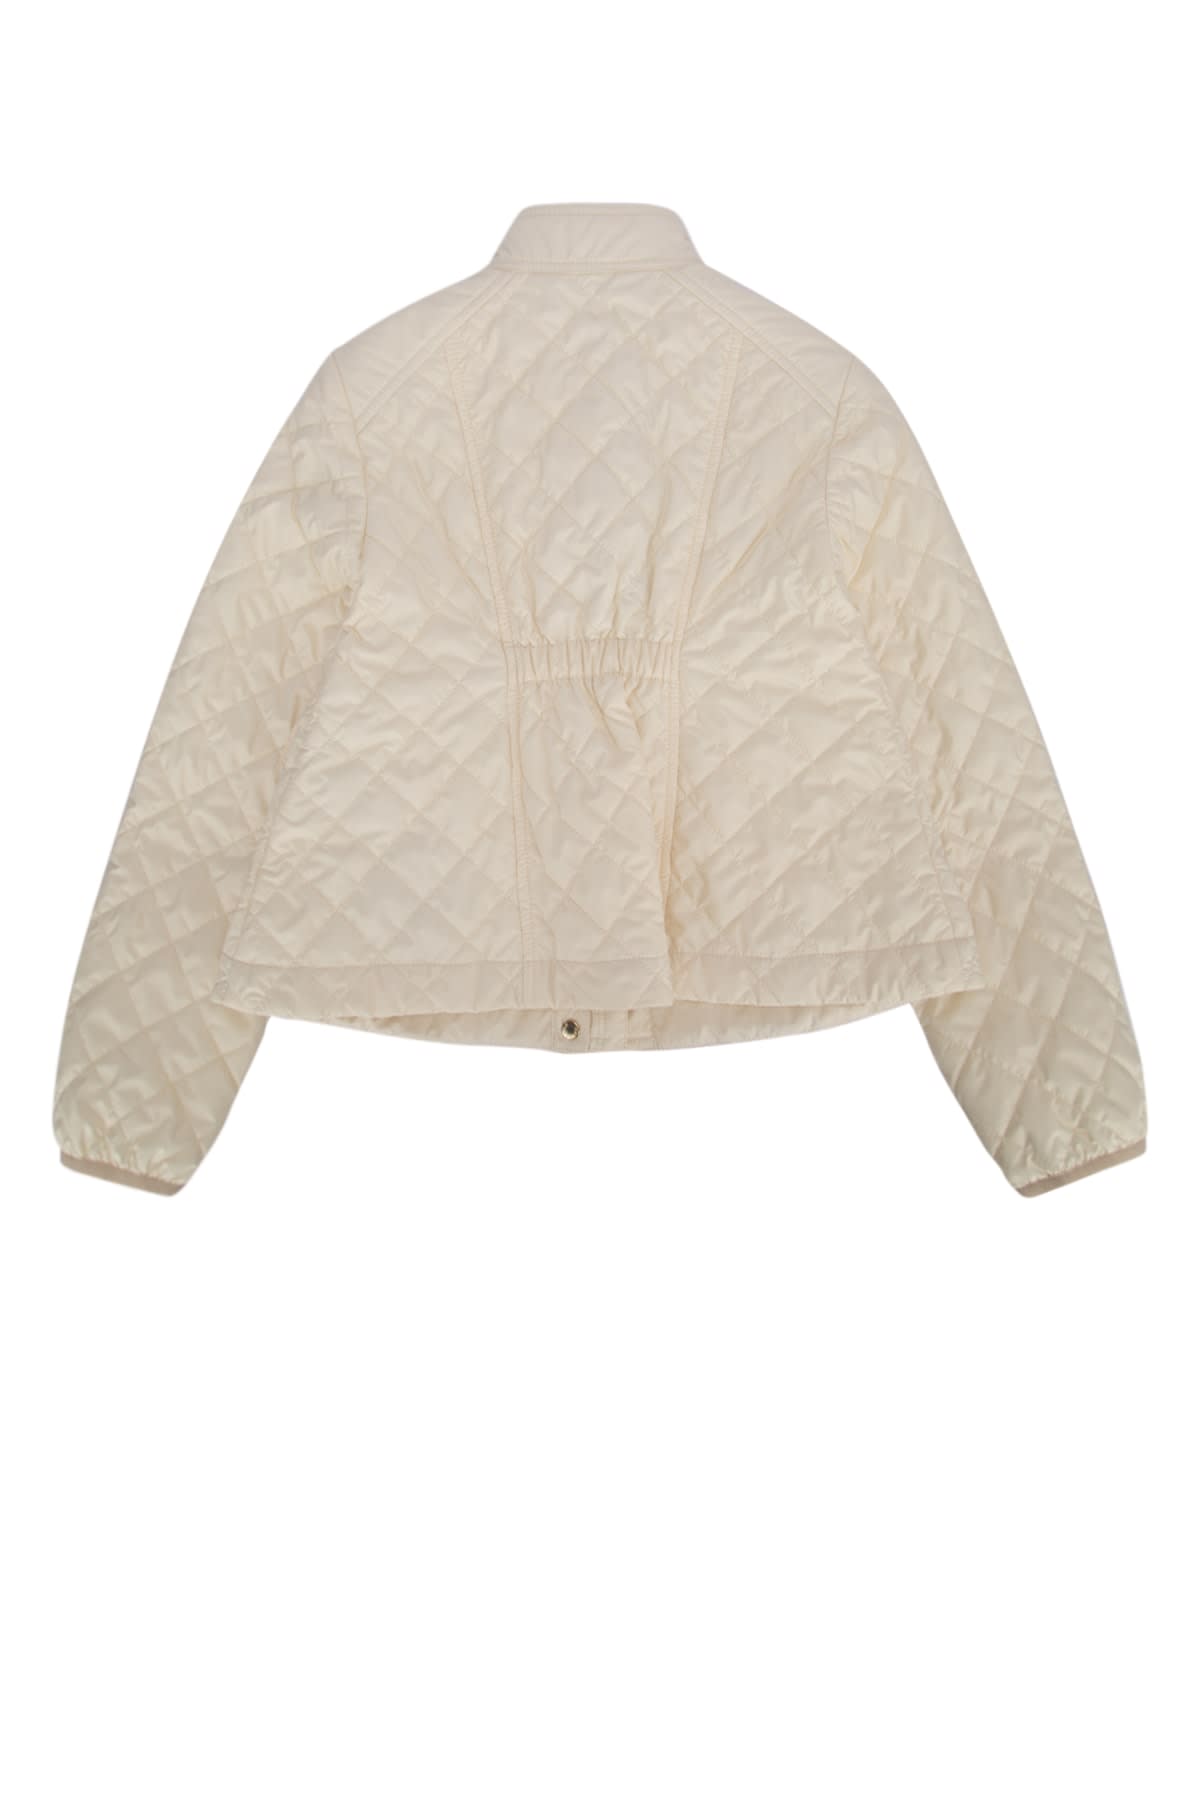 Moncler Kids' Giacca In 041